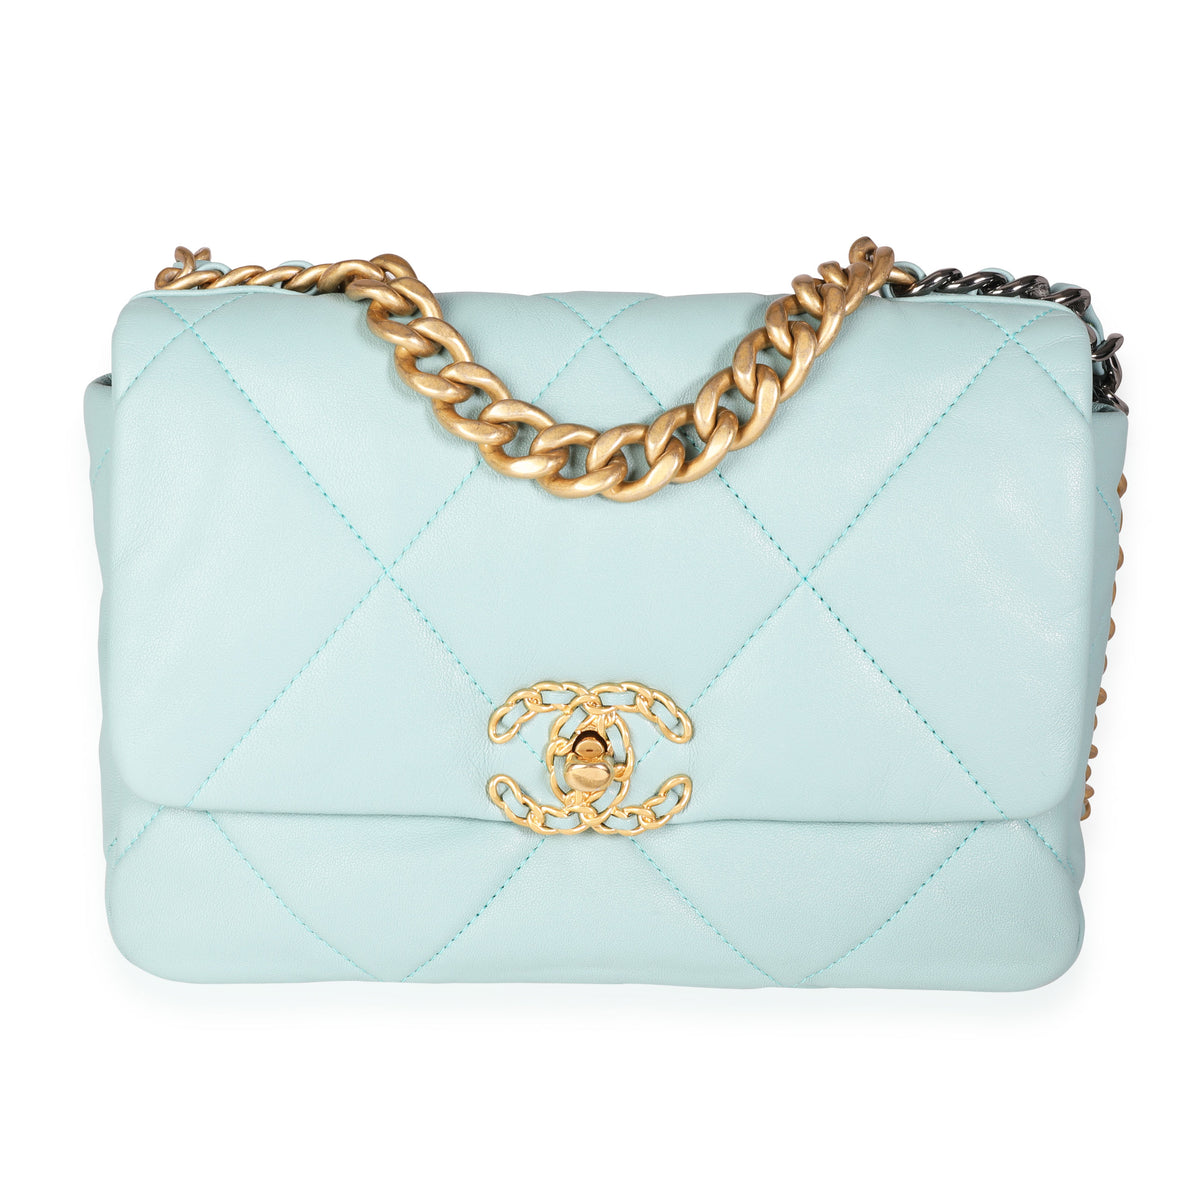 Chanel Lambskin Quilted Medium 19 Flap Bag Blue